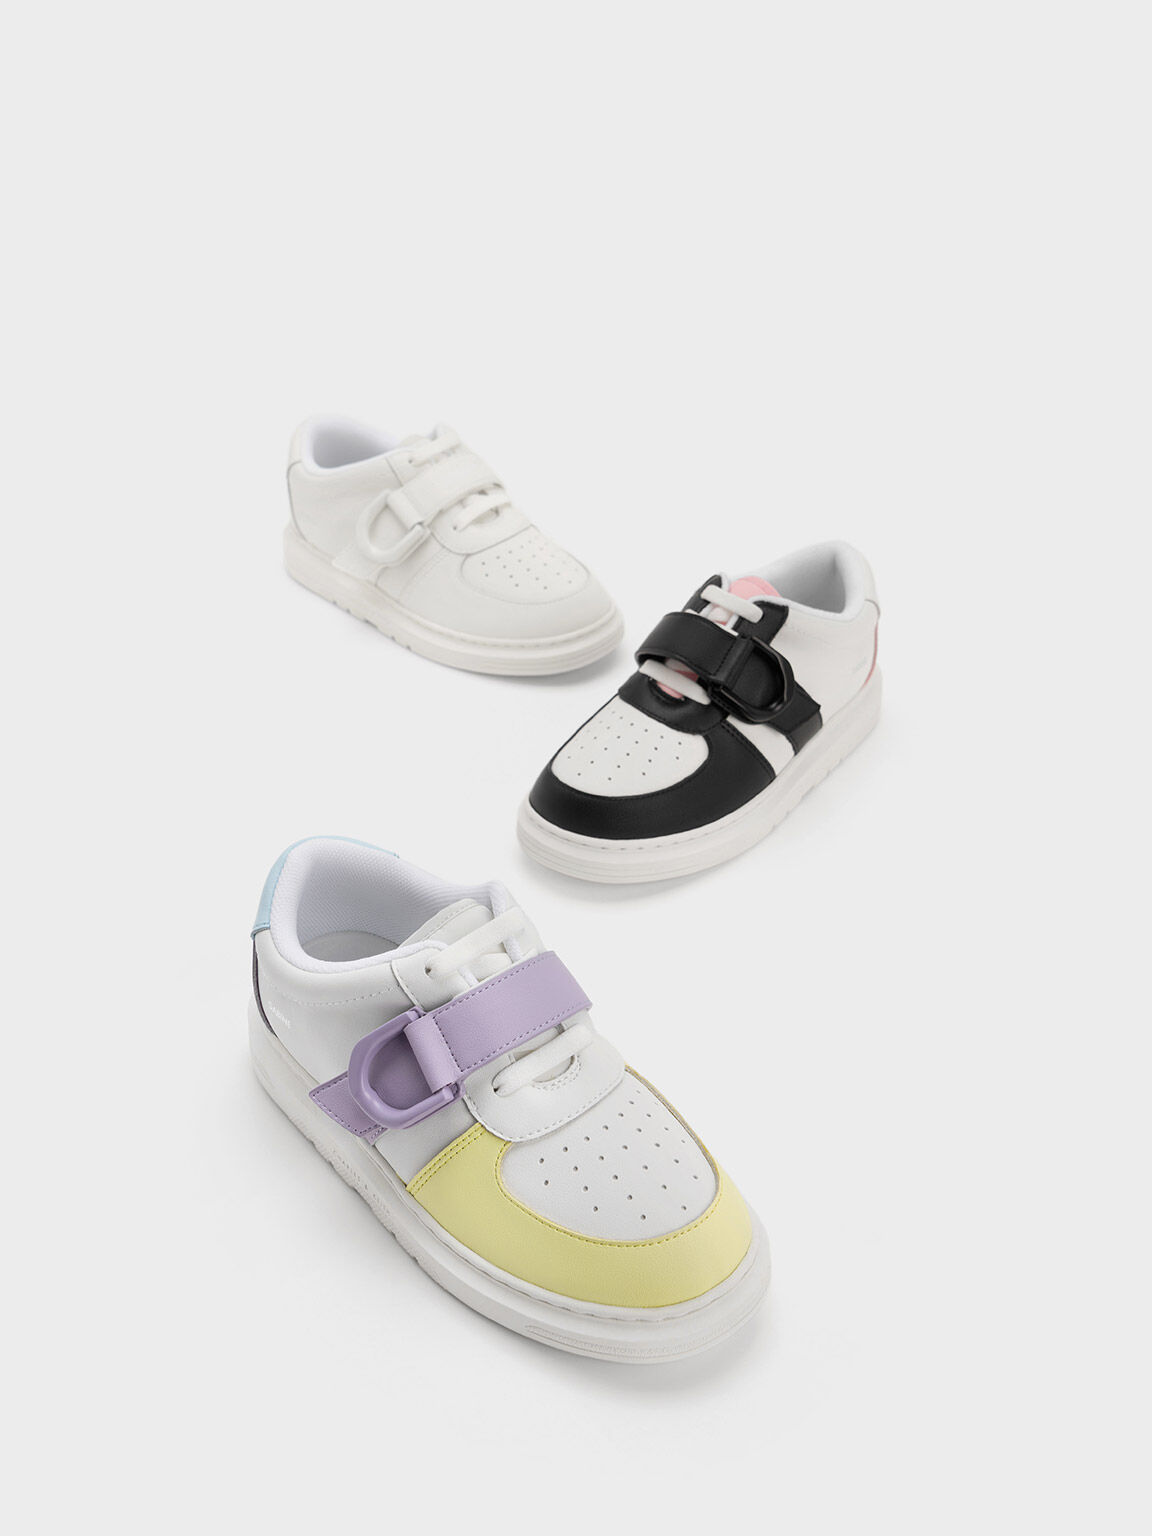 Girls' Shoes | Kids' Fashion Collection | CHARLES & KEITH UK